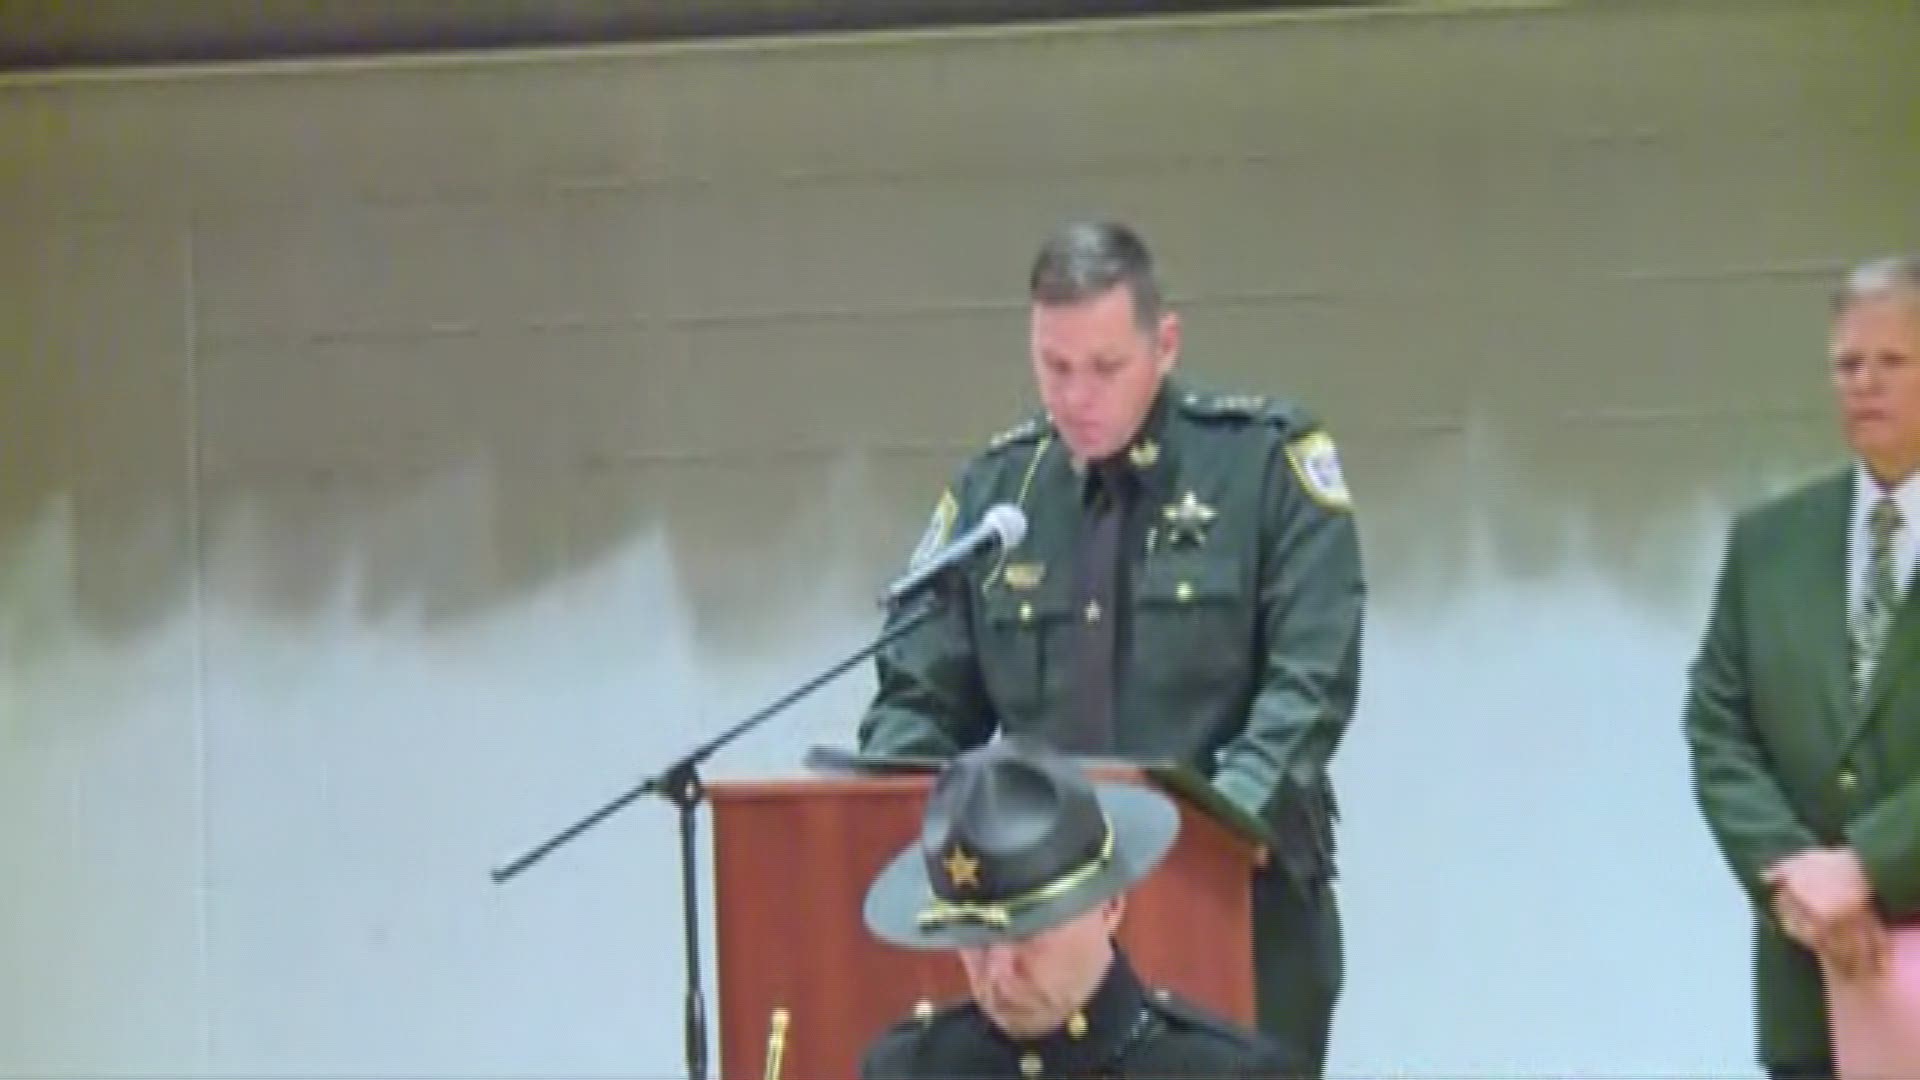 The Sheriff shares many stories about the two fallen heroes during their funeral in Bell, Florida.